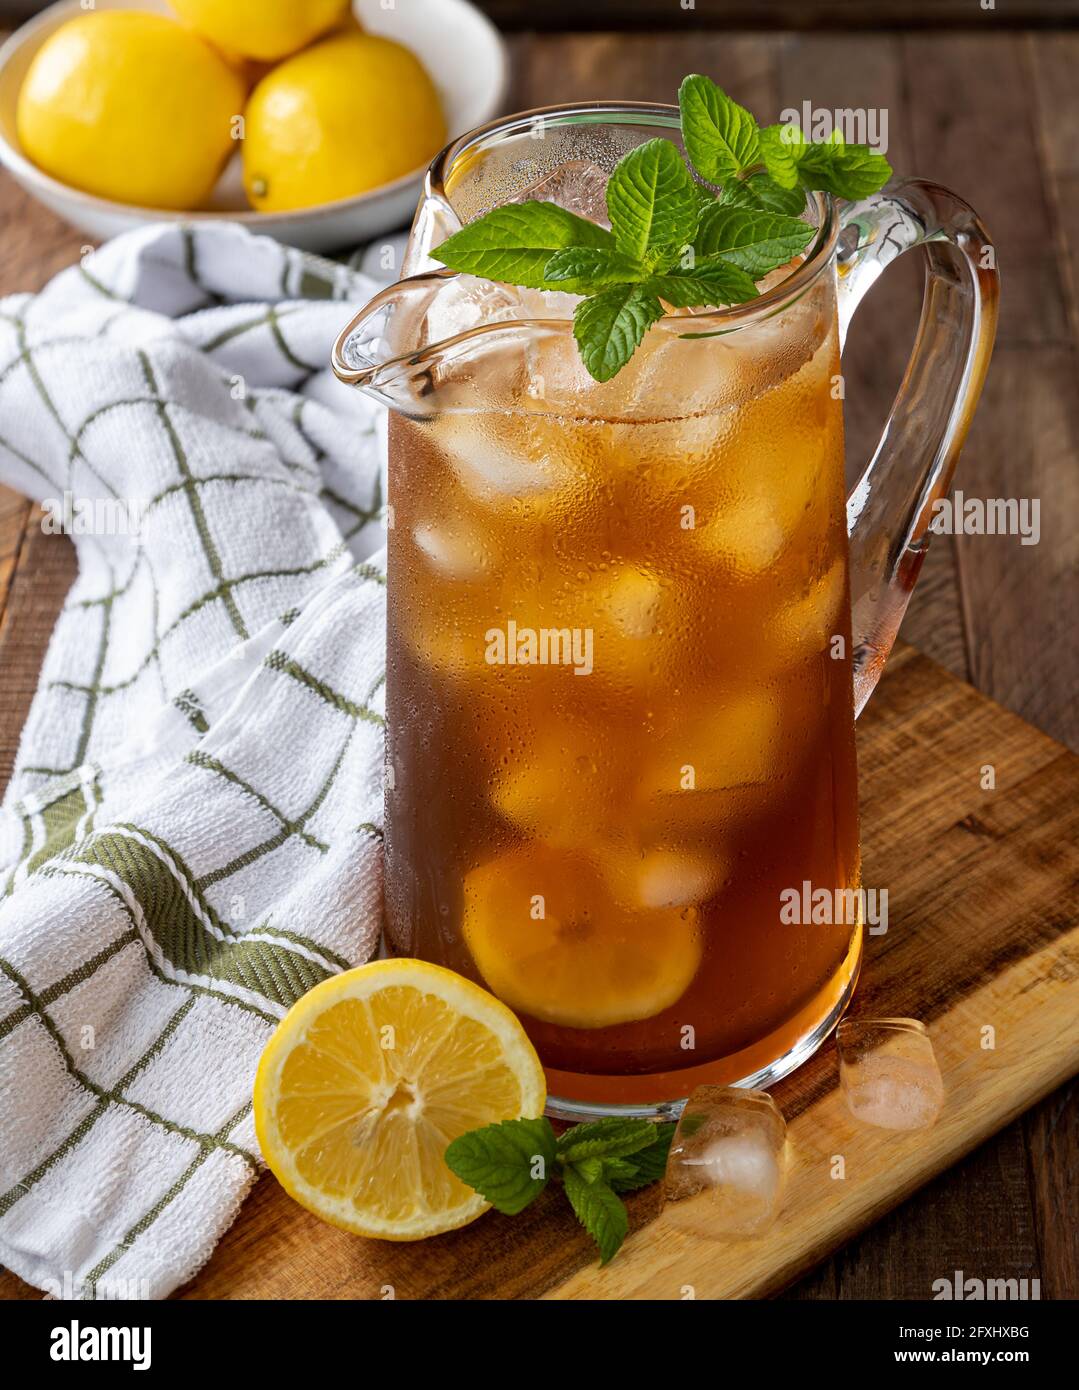 https://c8.alamy.com/comp/2FXHXBG/pitcher-of-iced-tea-with-lemon-and-mint-on-a-rustic-wooden-table-2FXHXBG.jpg